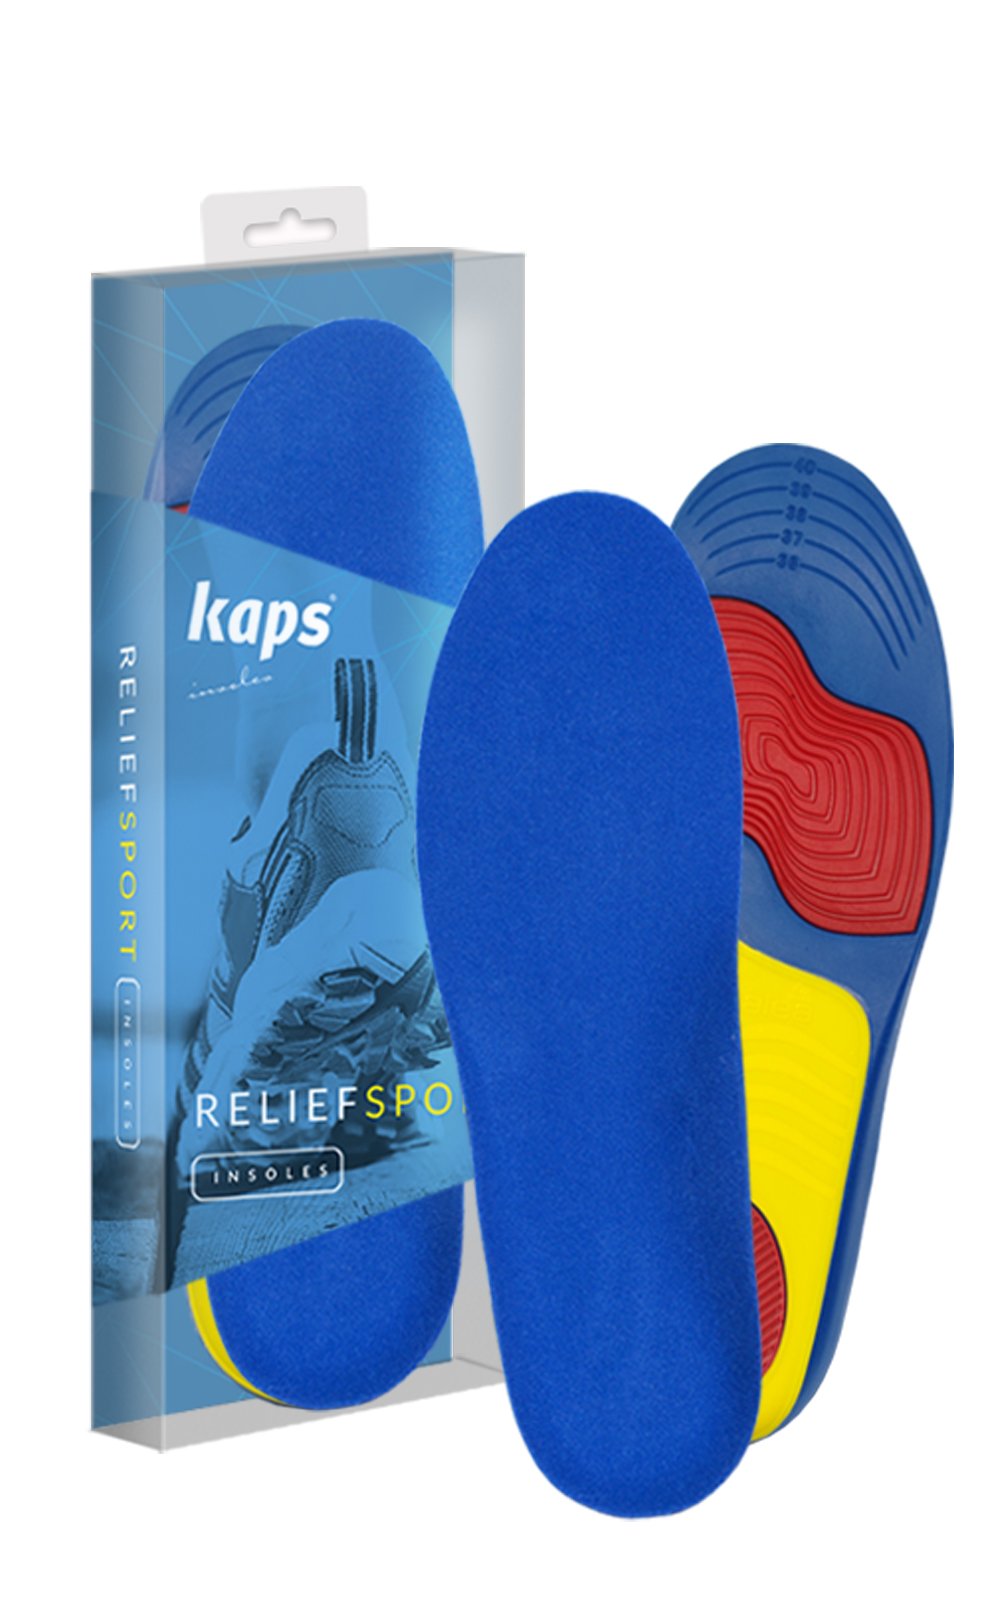 [Australia] - Kaps RELIEFSPORT – Hi-Tech Premium Orthotic Sports Shoe Insoles - Balance - Pain Relief And Support, Cut To Size Women / 36-40 EUR / 3-7 UK / cut to size 